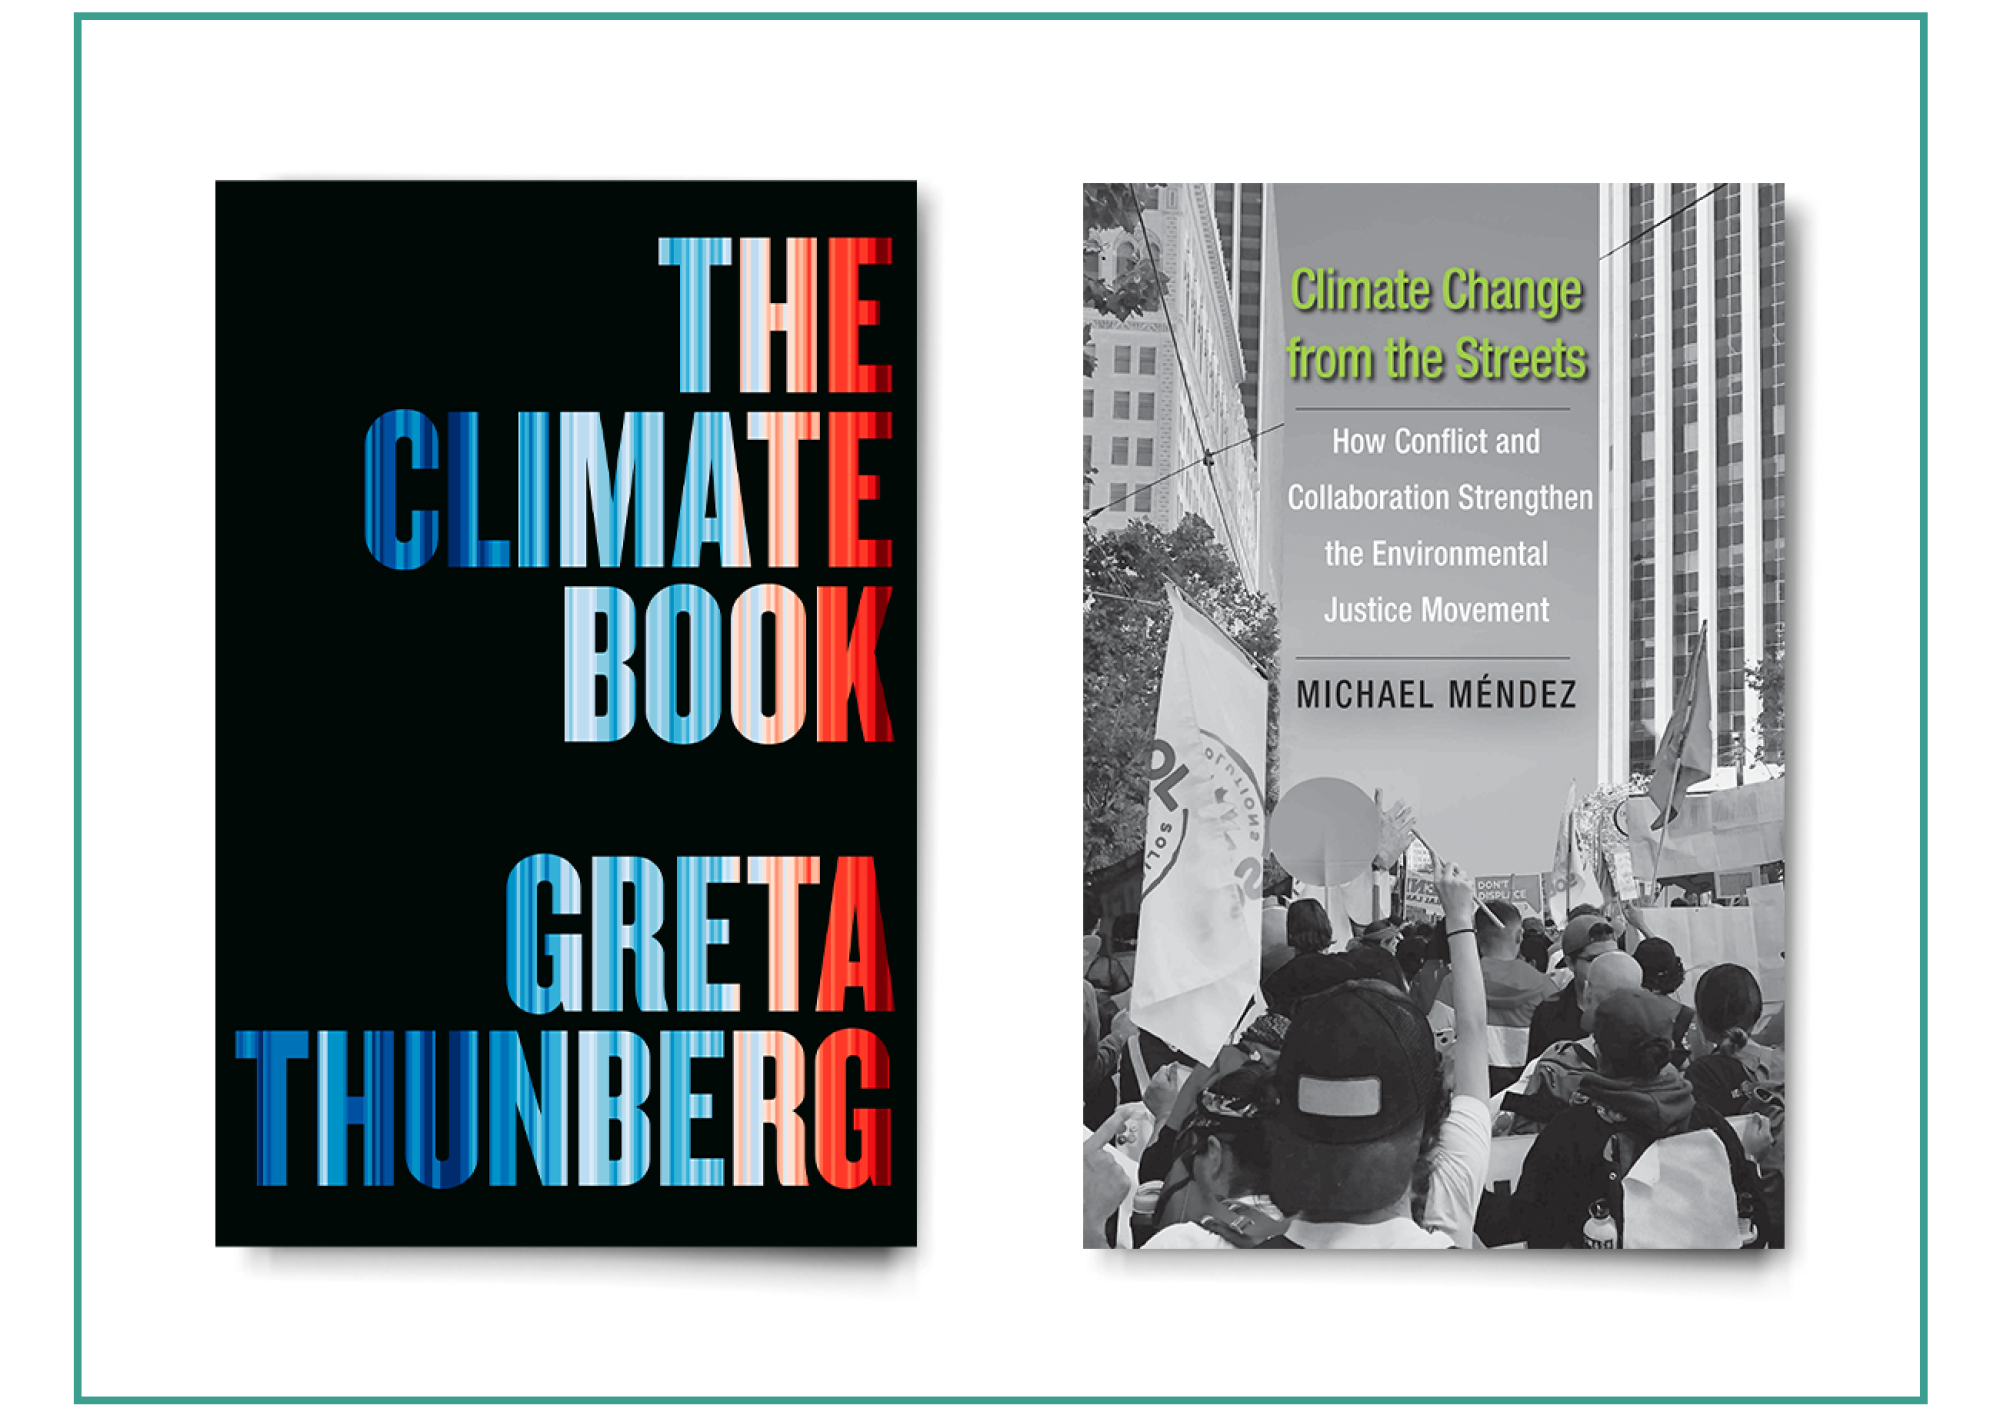 Book covers: "The Climate Book; Greta Thunberg" and "Climate Change from the Streets"